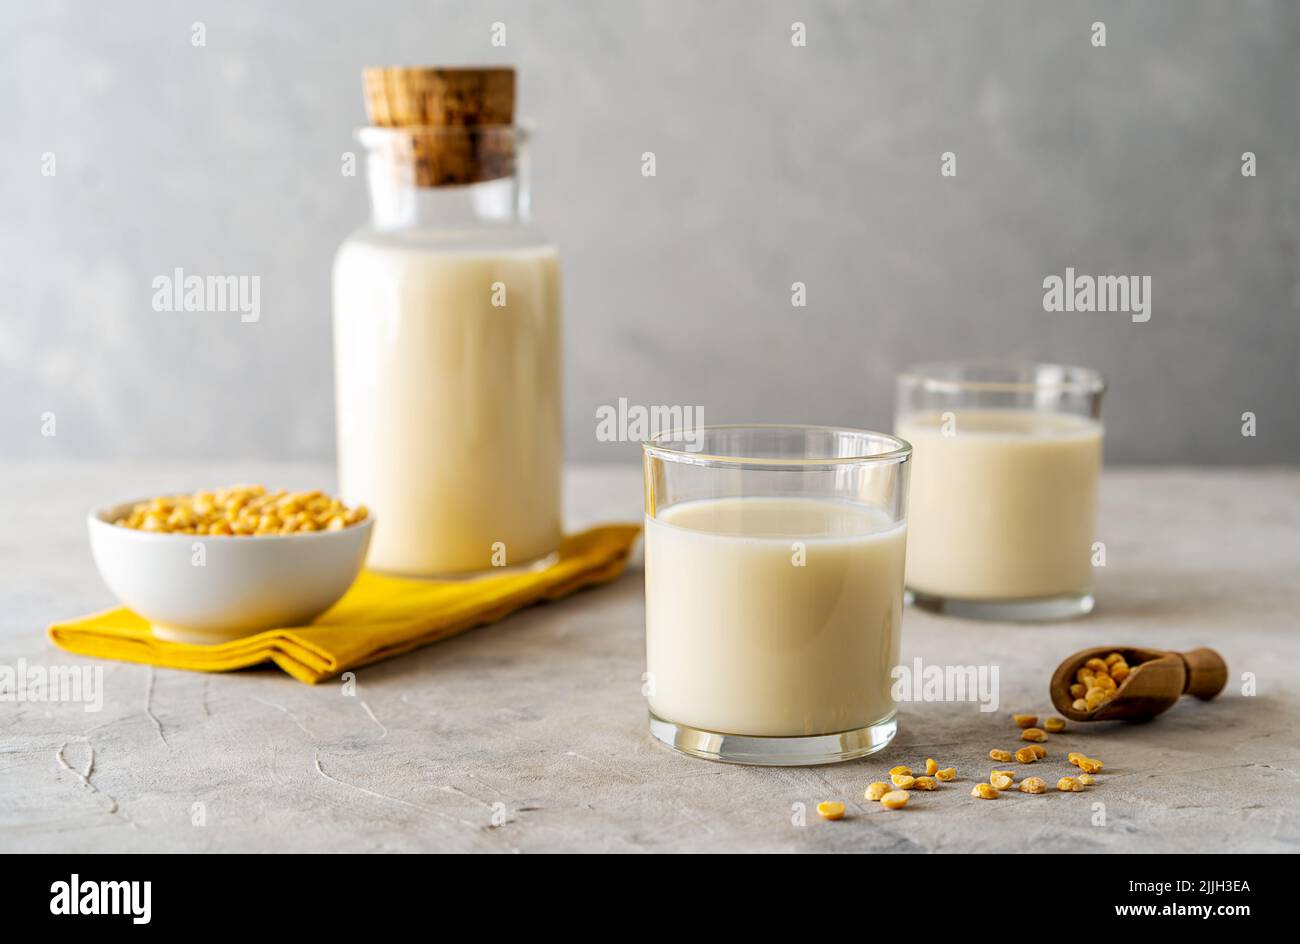 Vegan healthy pea milk in glass bottle and two glasses, concrete background, pea grains, yellow napkin. Copy space Stock Photo